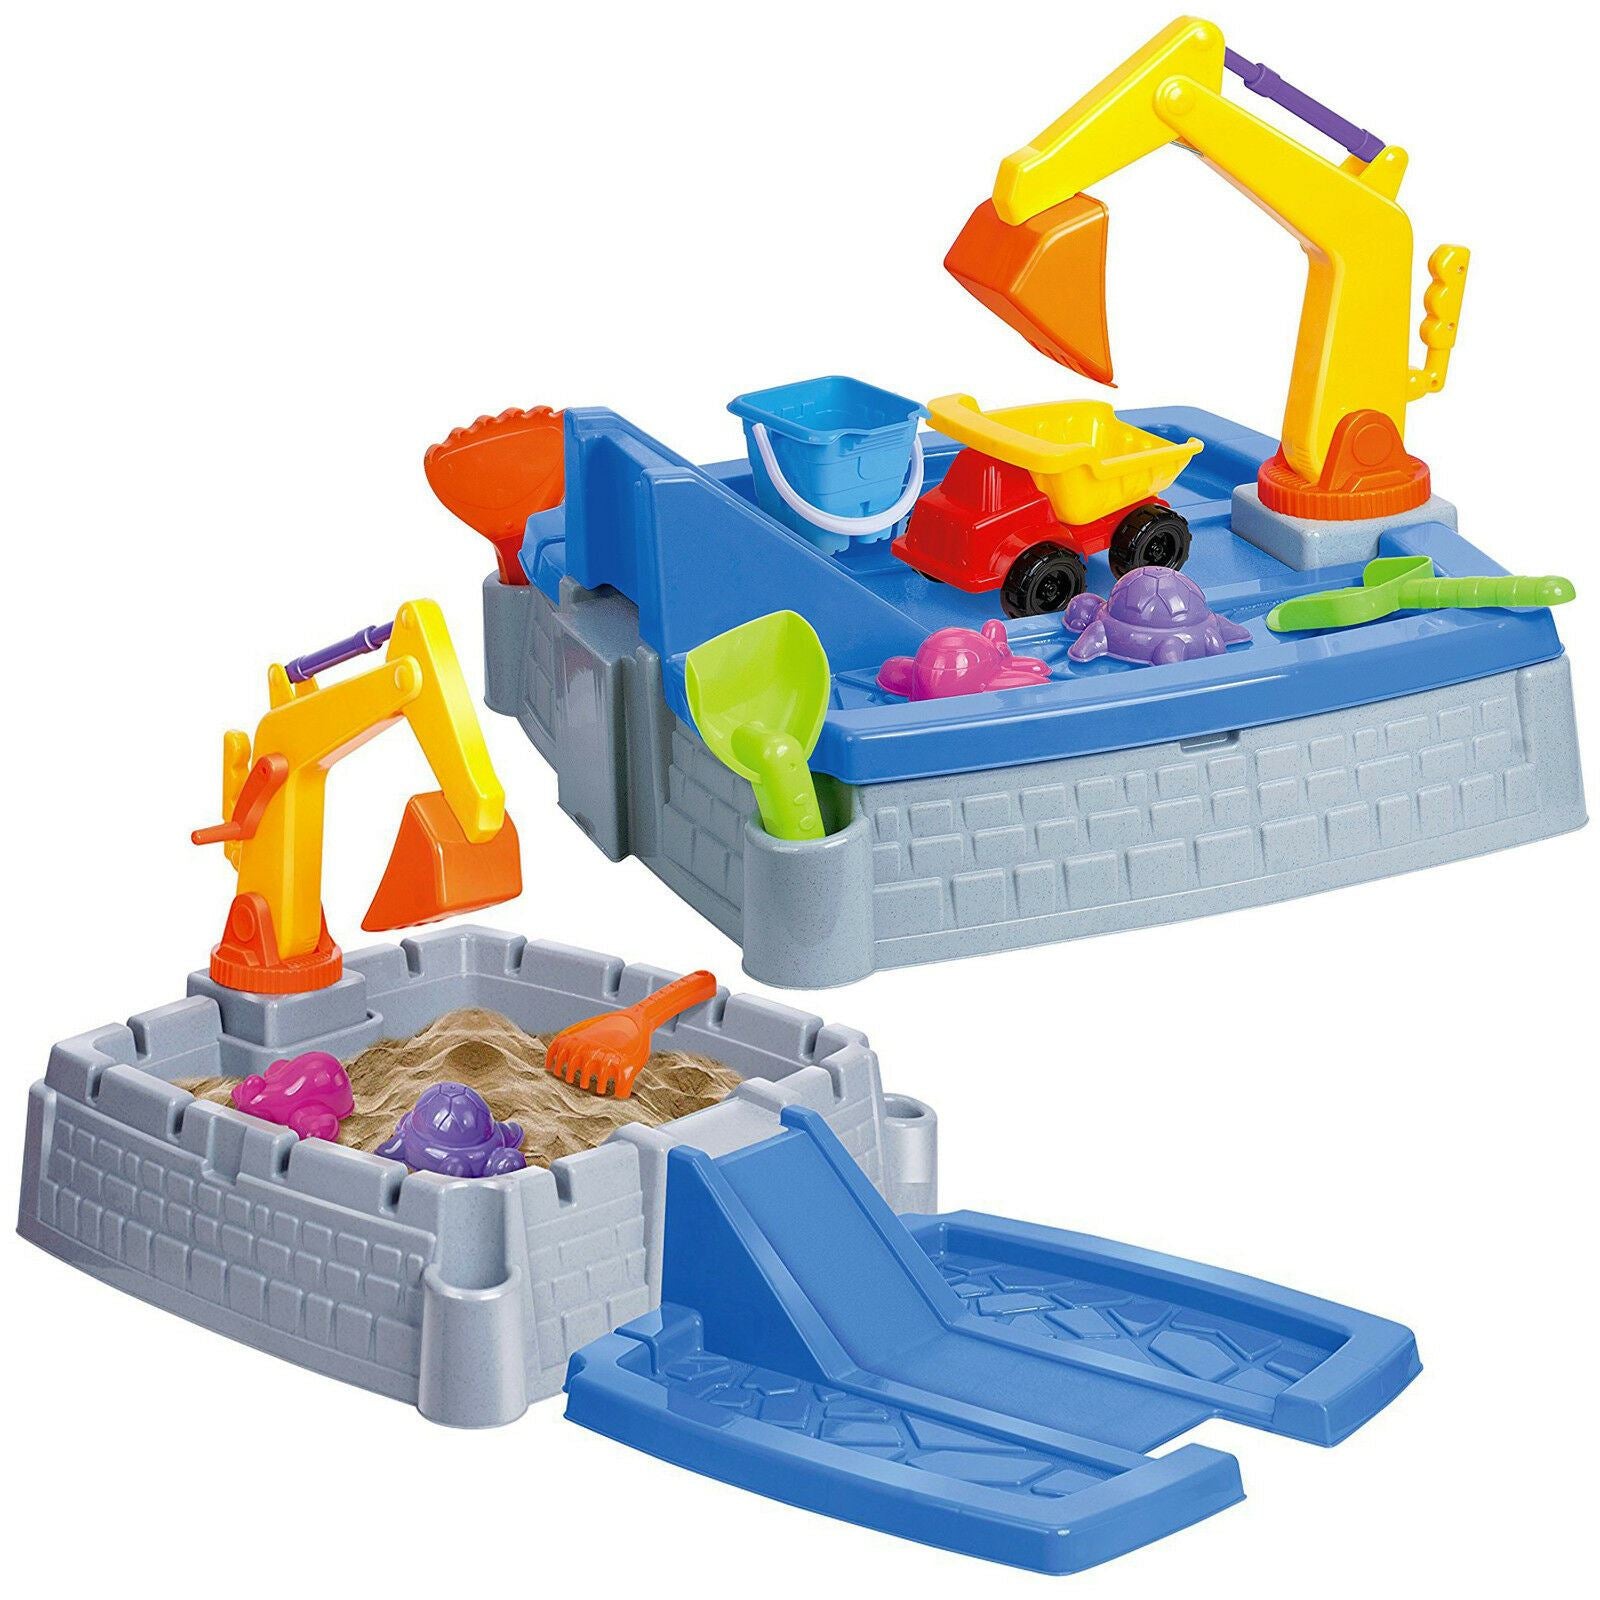 2 in 1 Kids Sand Box Water Table by The Magic Toy Shop - The Magic Toy Shop